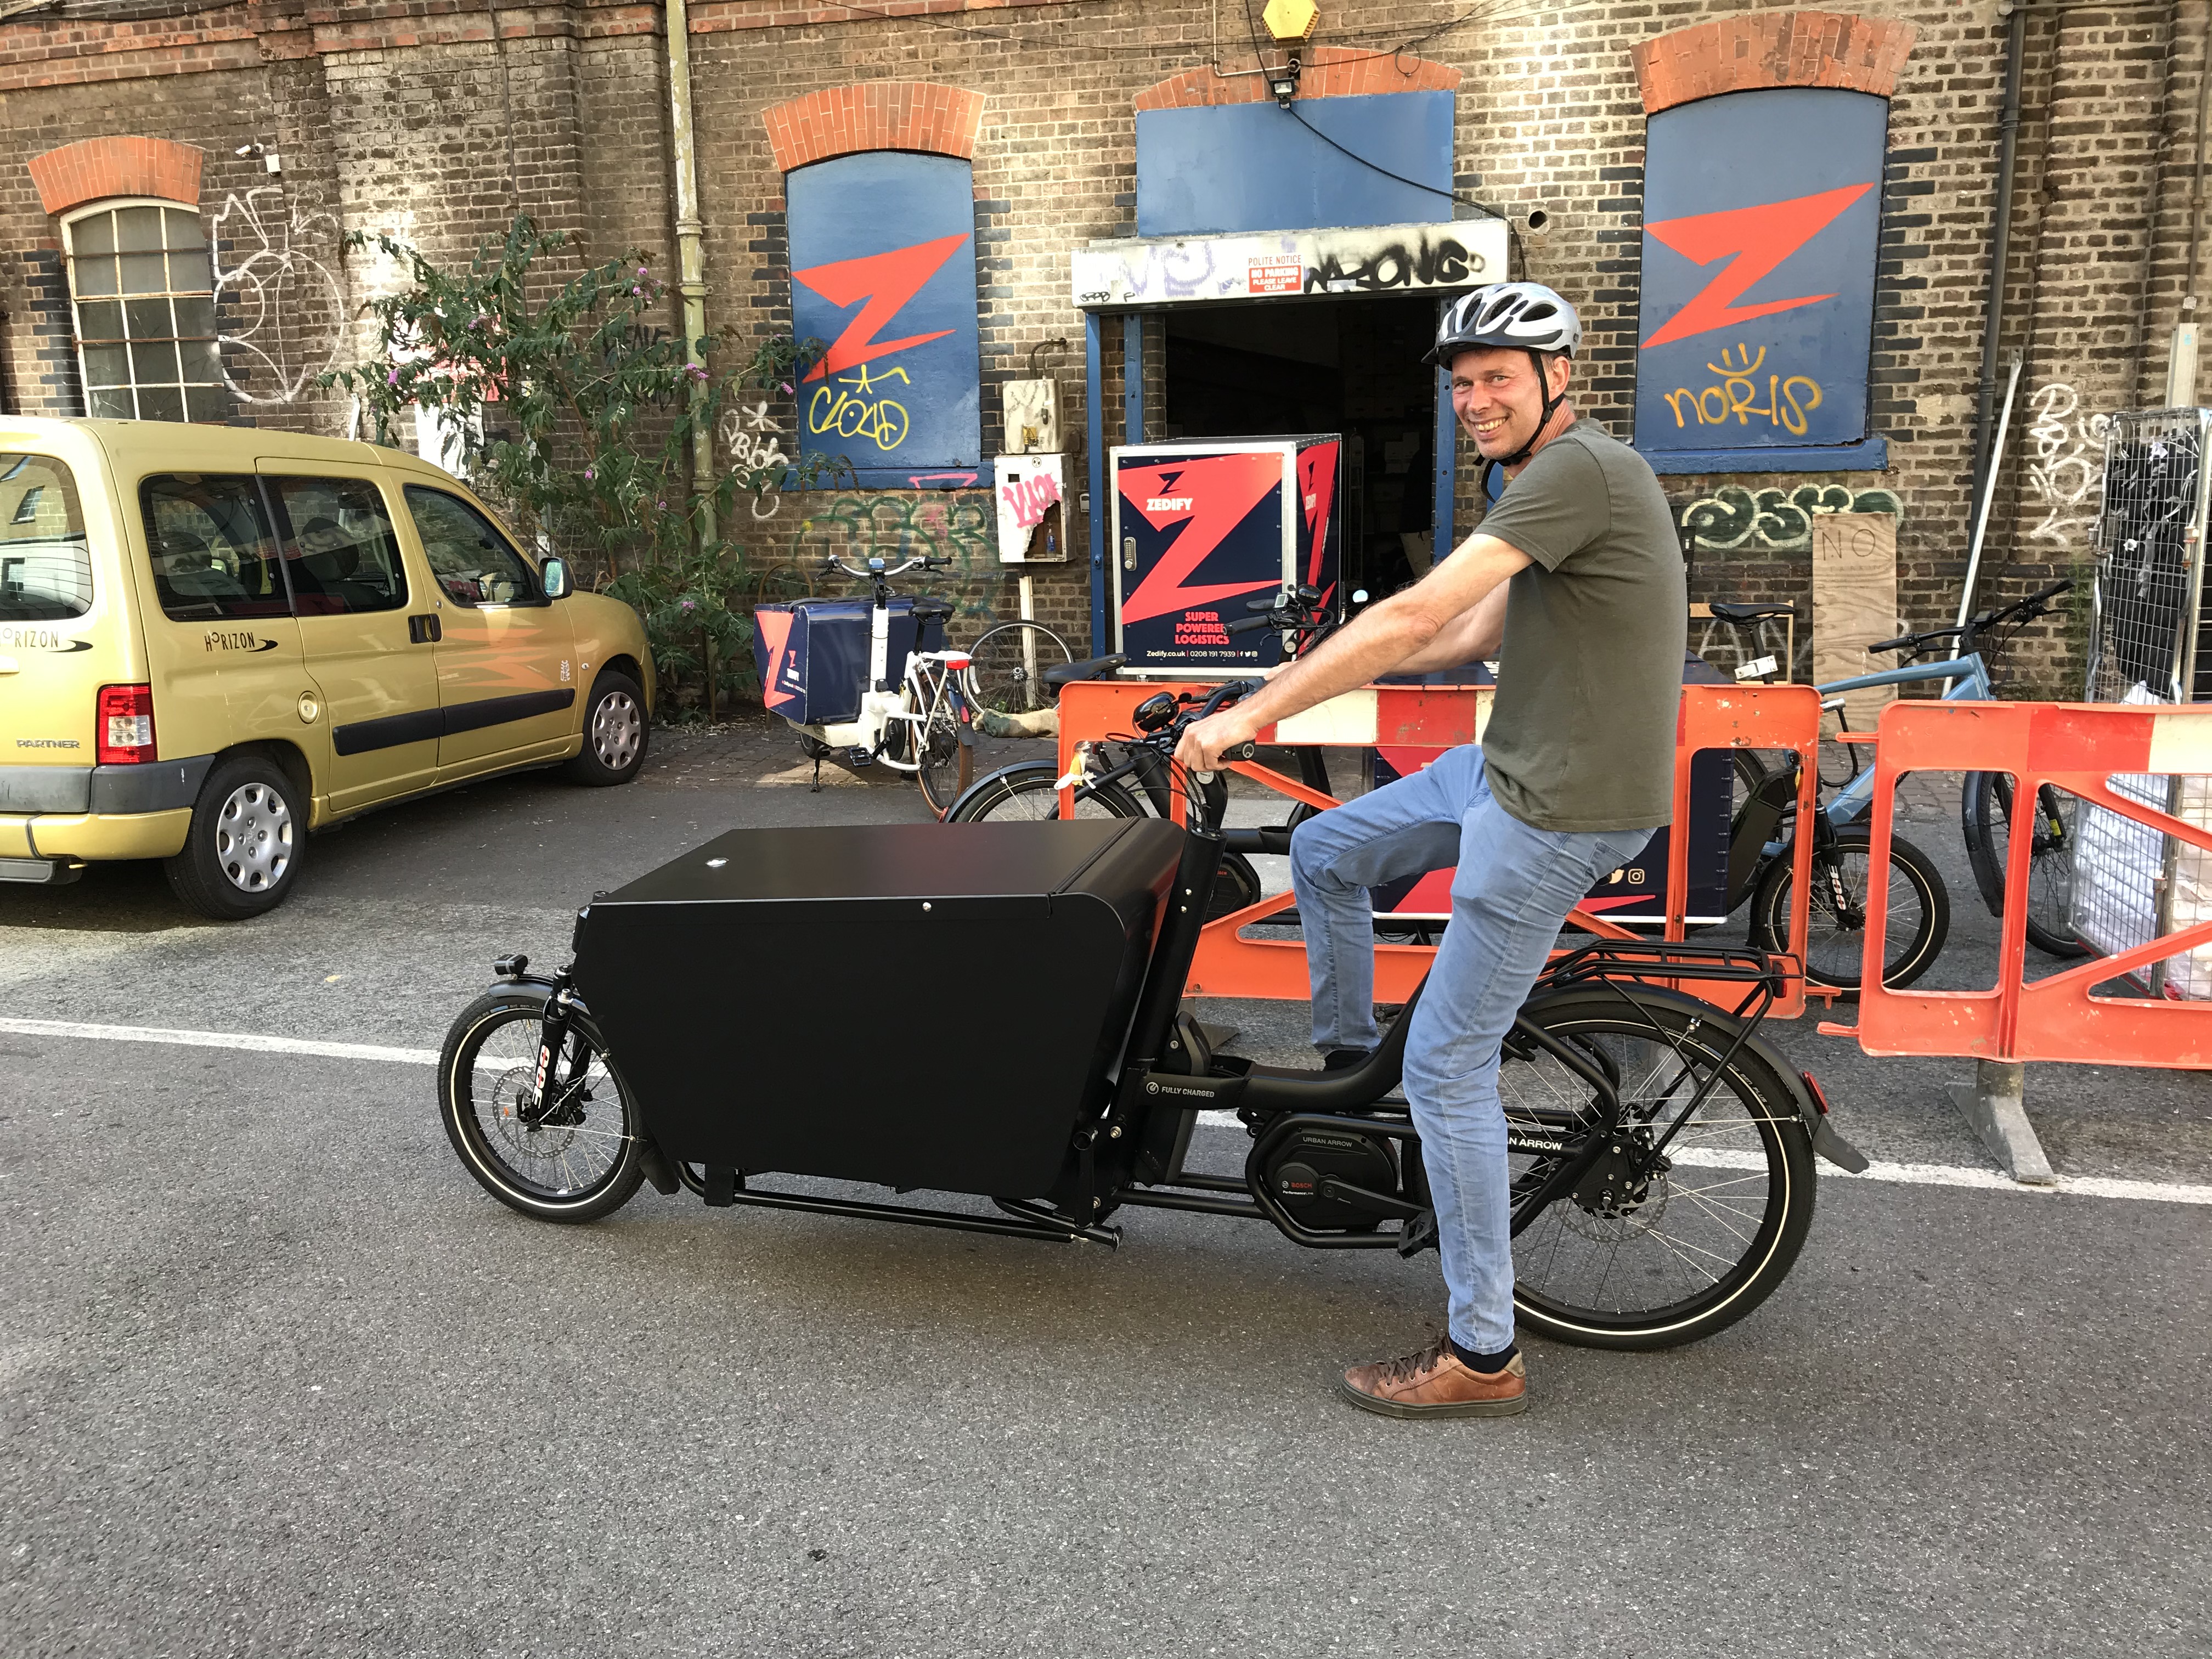 Man on an electric bike with a storage trunk attached to the front